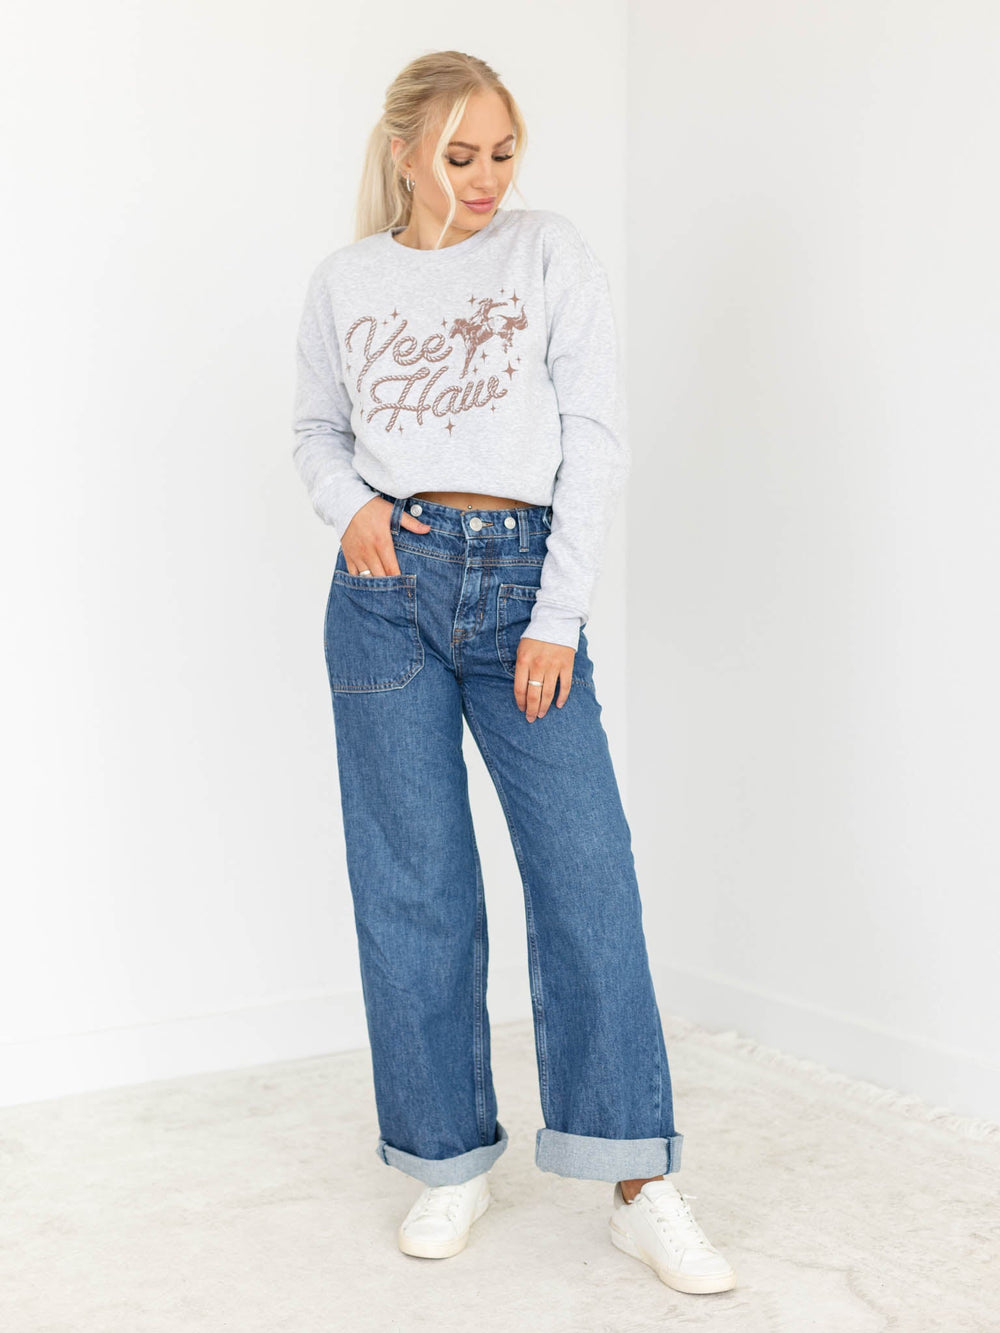 Free People Tunnel Vision Palmer Cuffed JeanDenim jeans